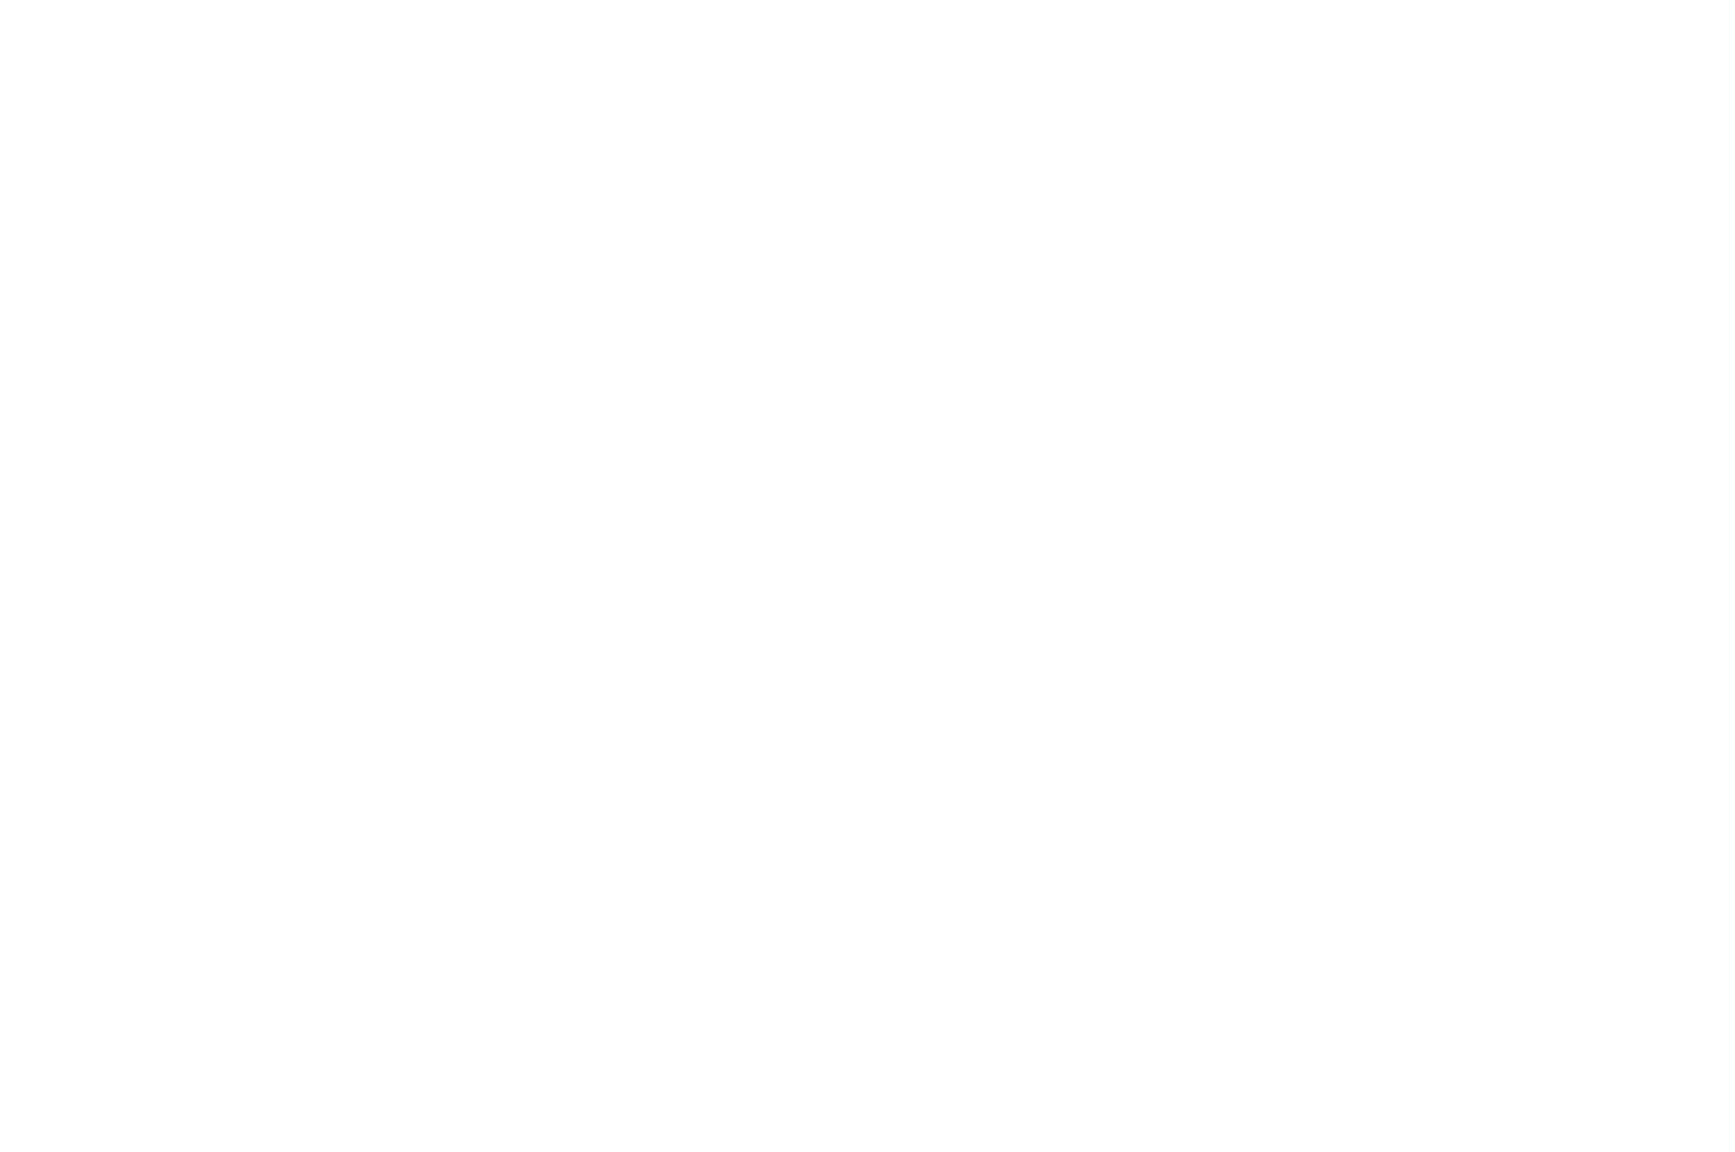 Best Documentary Cinematography - Content Film Festival and Media Summit - 2021